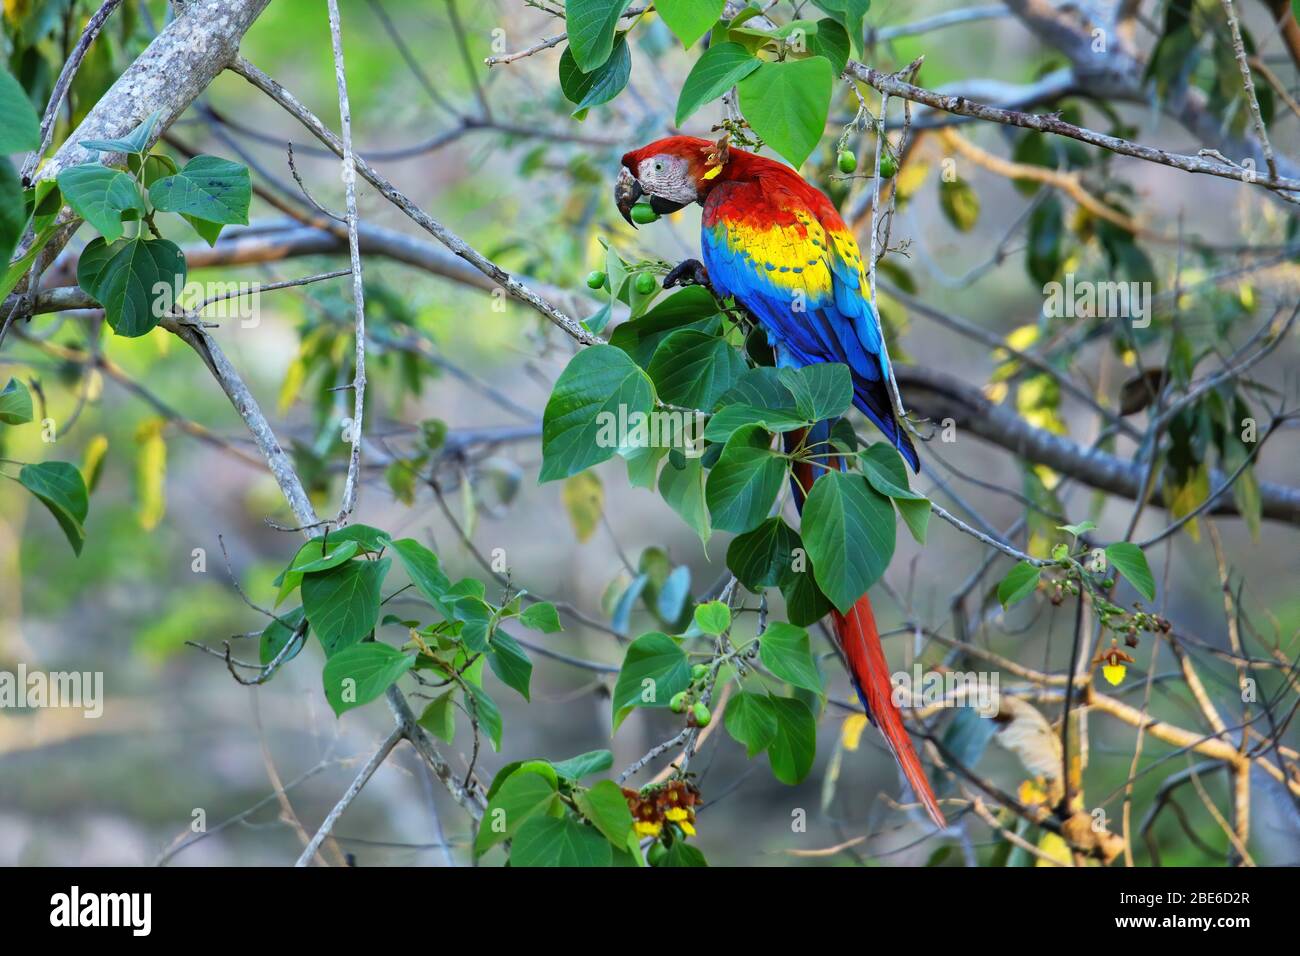 Scarlet macaw (Ara macao) eating fruit in a tree, Costa Rica Stock Photo